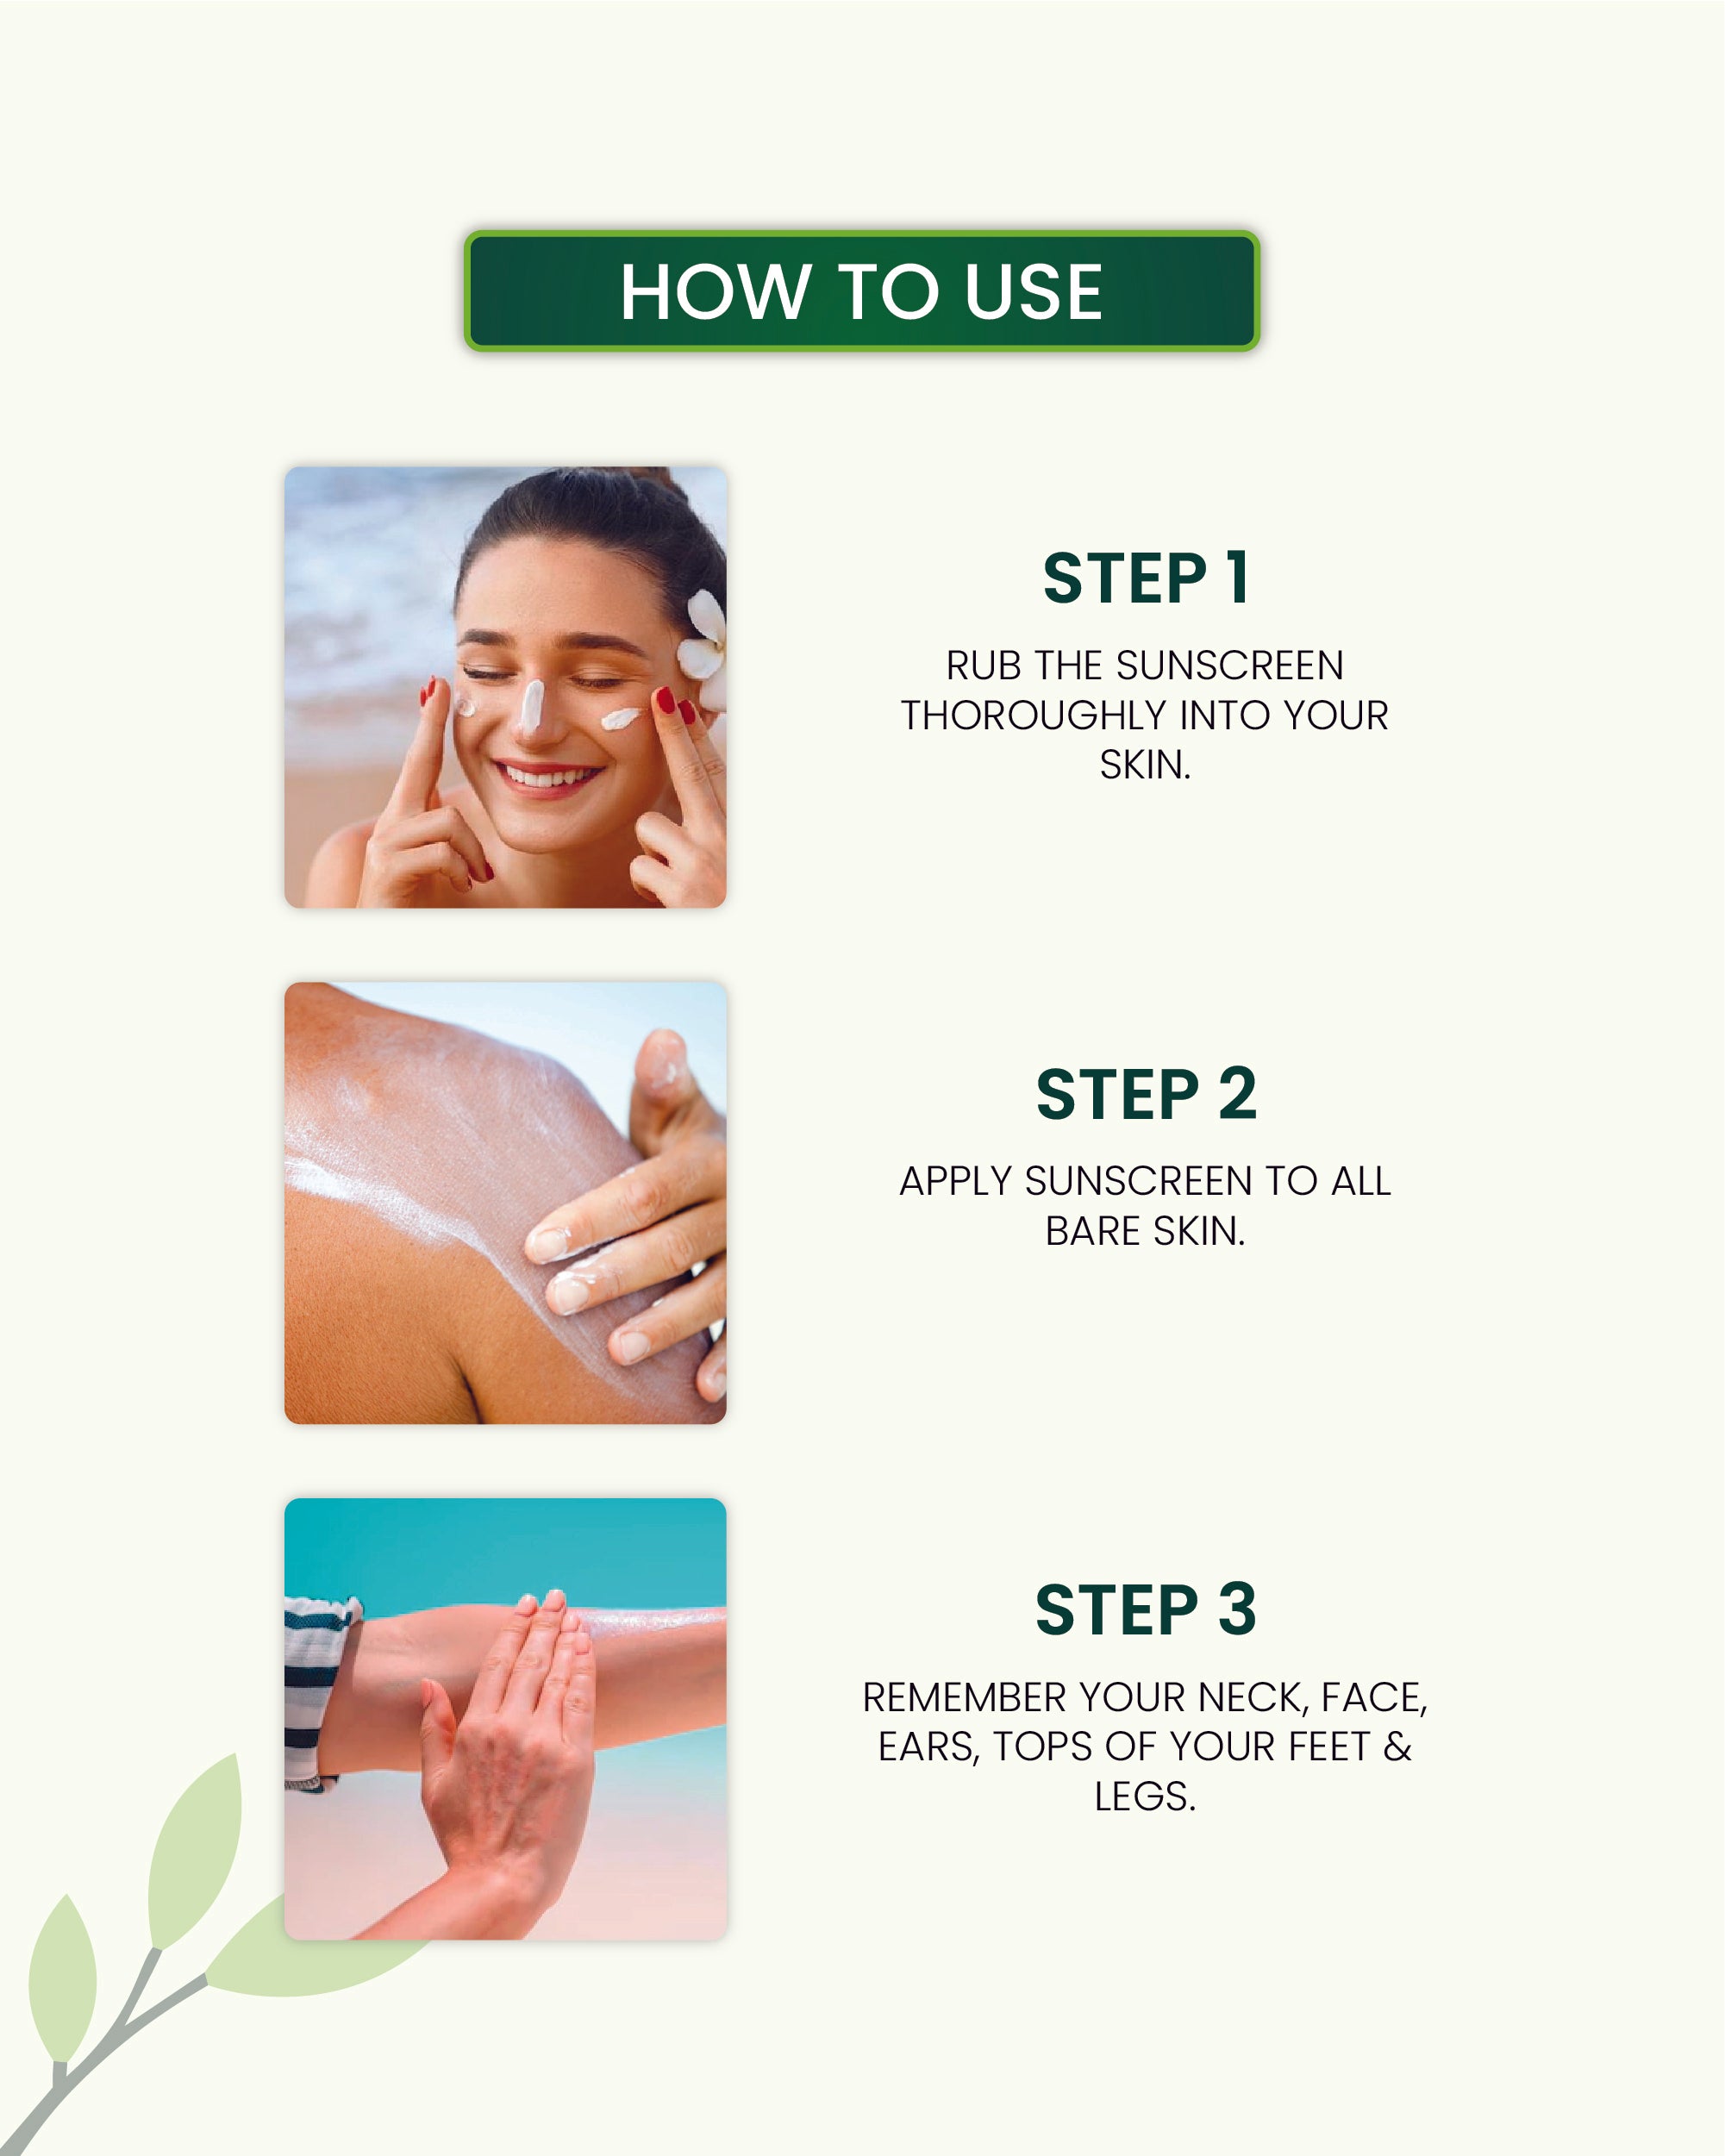 How to Use 3 in 1 Daily Sunscreen